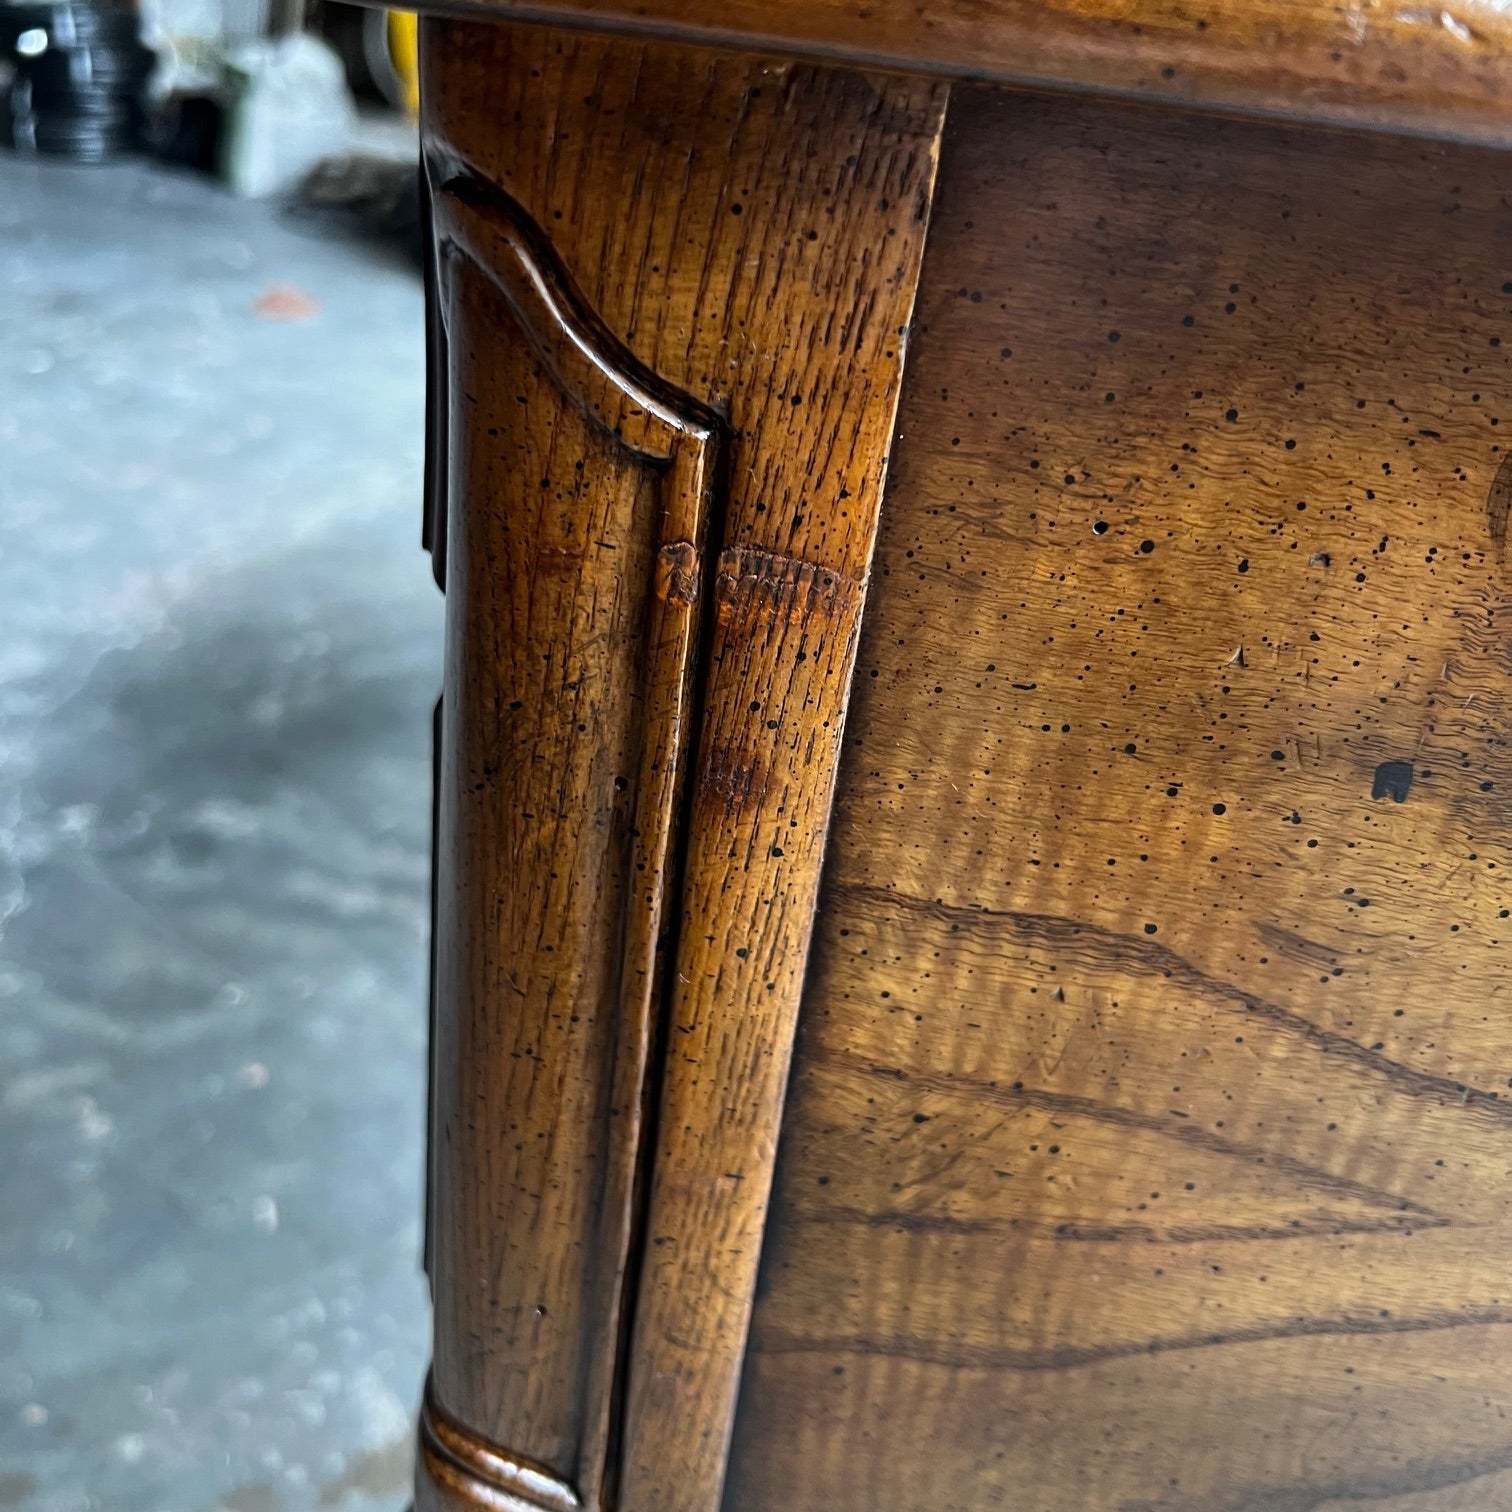 A fabulous Louis XV style desk which boasts elegant cabriole legs, four drawers, the left being a double height drawer, with wonderful oak grain and charming carved details. The desk also features a beautifully burled top with mitred corners and